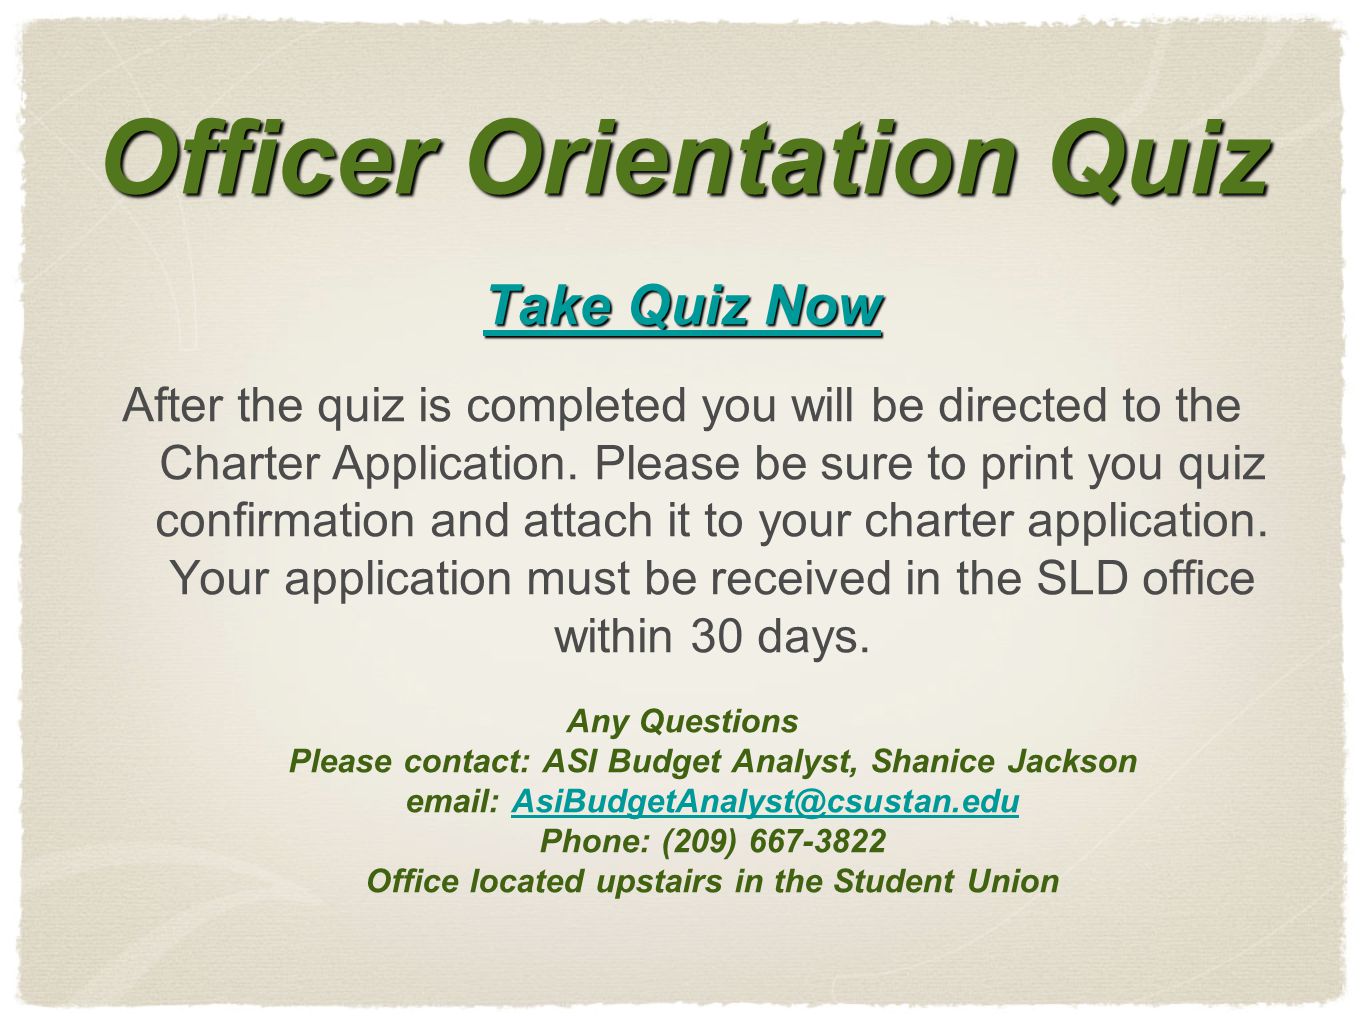 Officer Orientation Quiz Take Quiz Now Take Quiz Now After the quiz is completed you will be directed to the Charter Application.